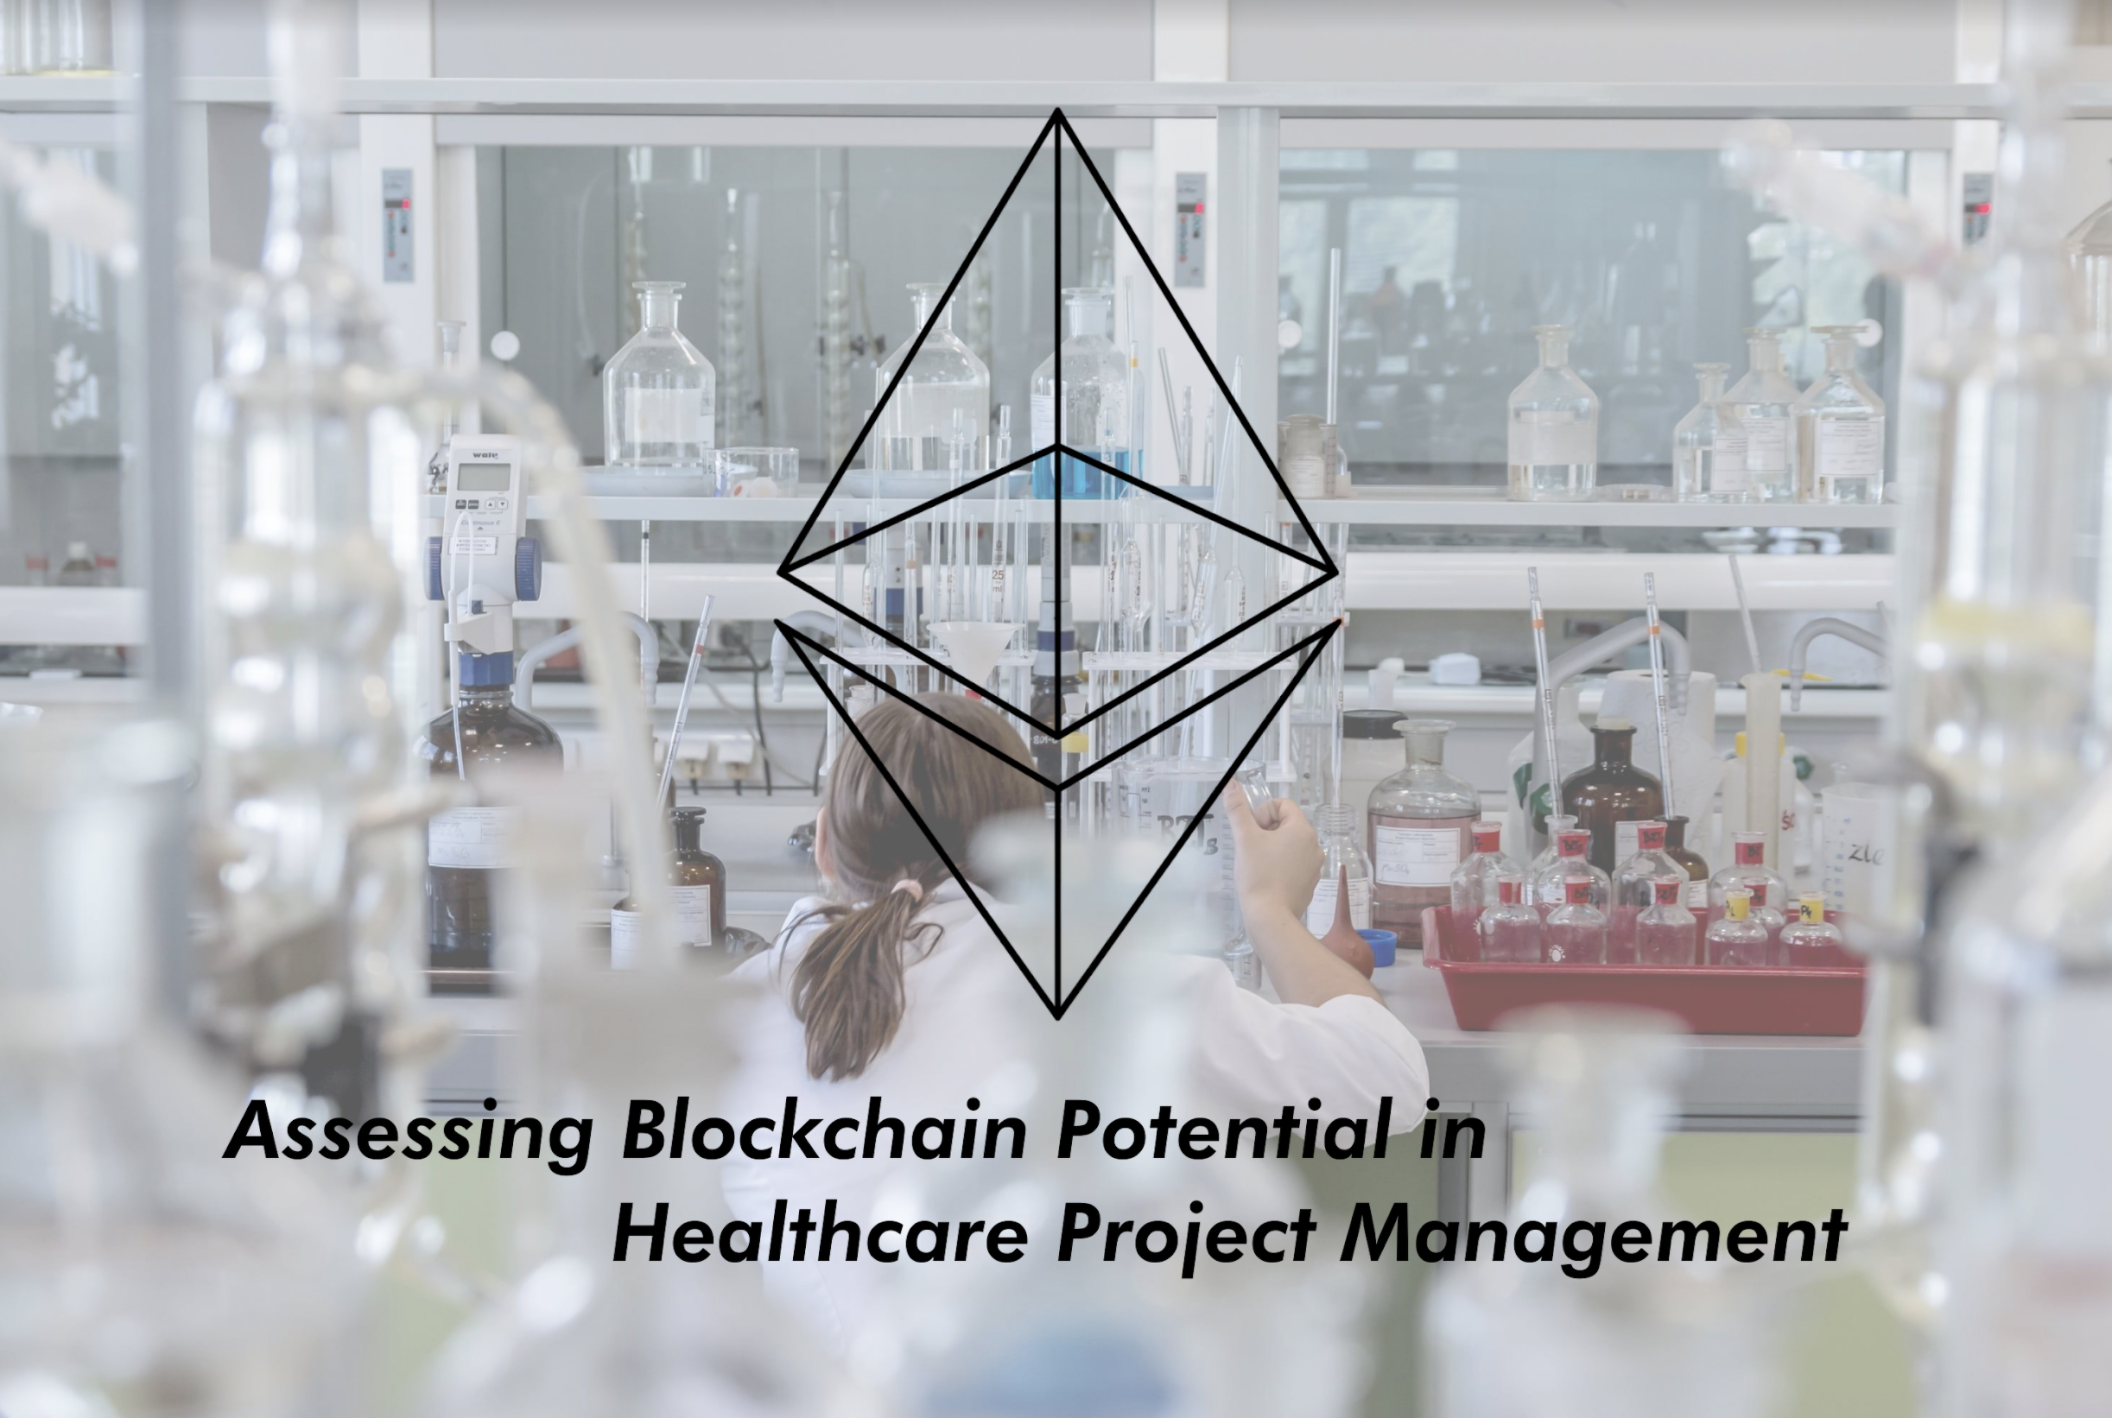 Assessing Blockchain Potential in Healthcare Project Management through the Colony dApp